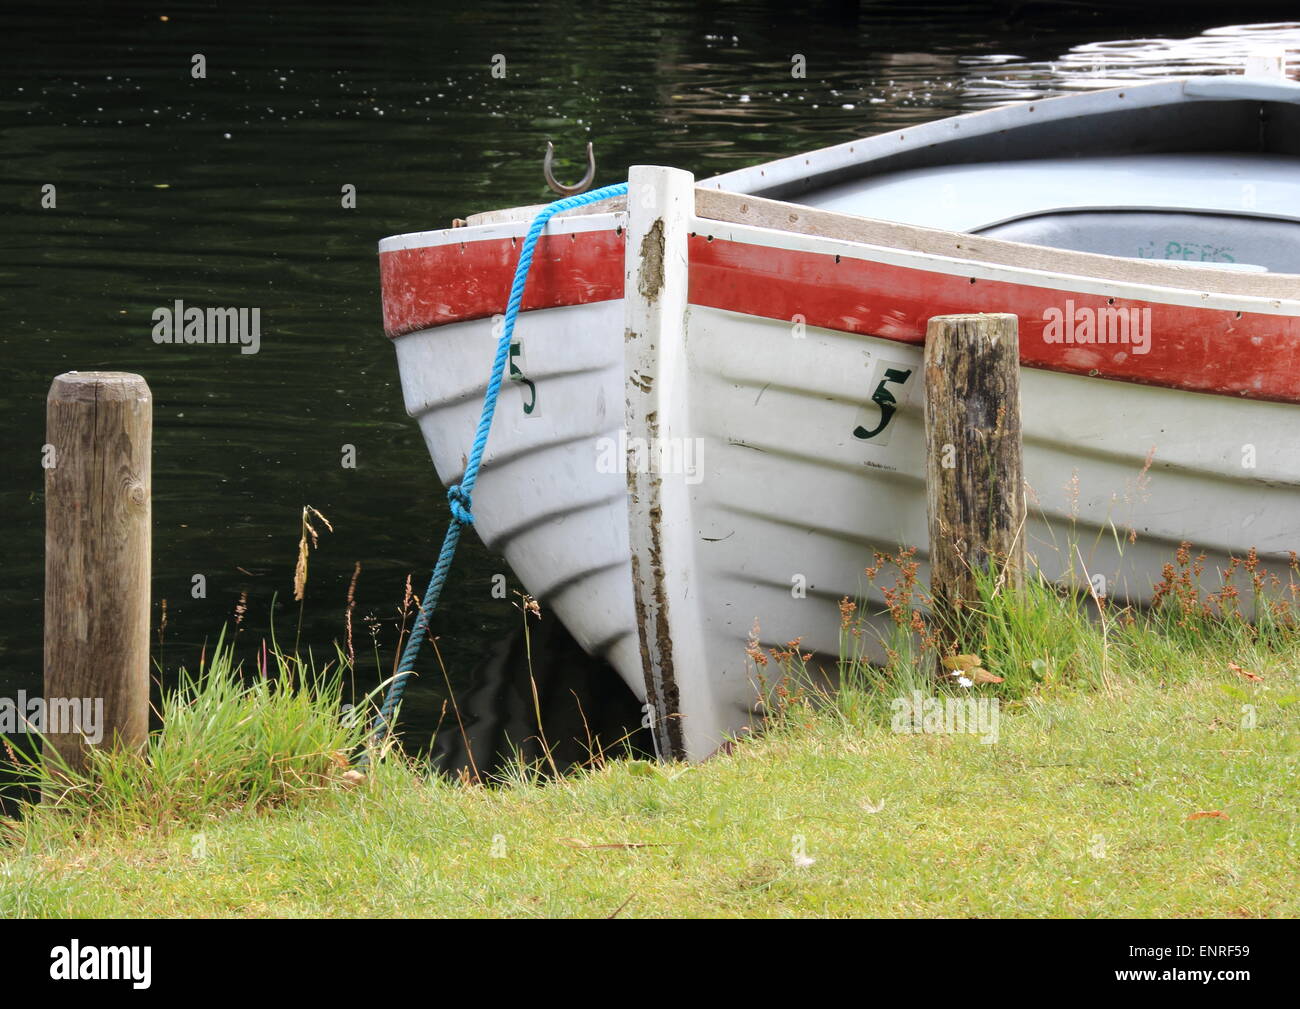 Rowing boat in water at grass field Stock Photo